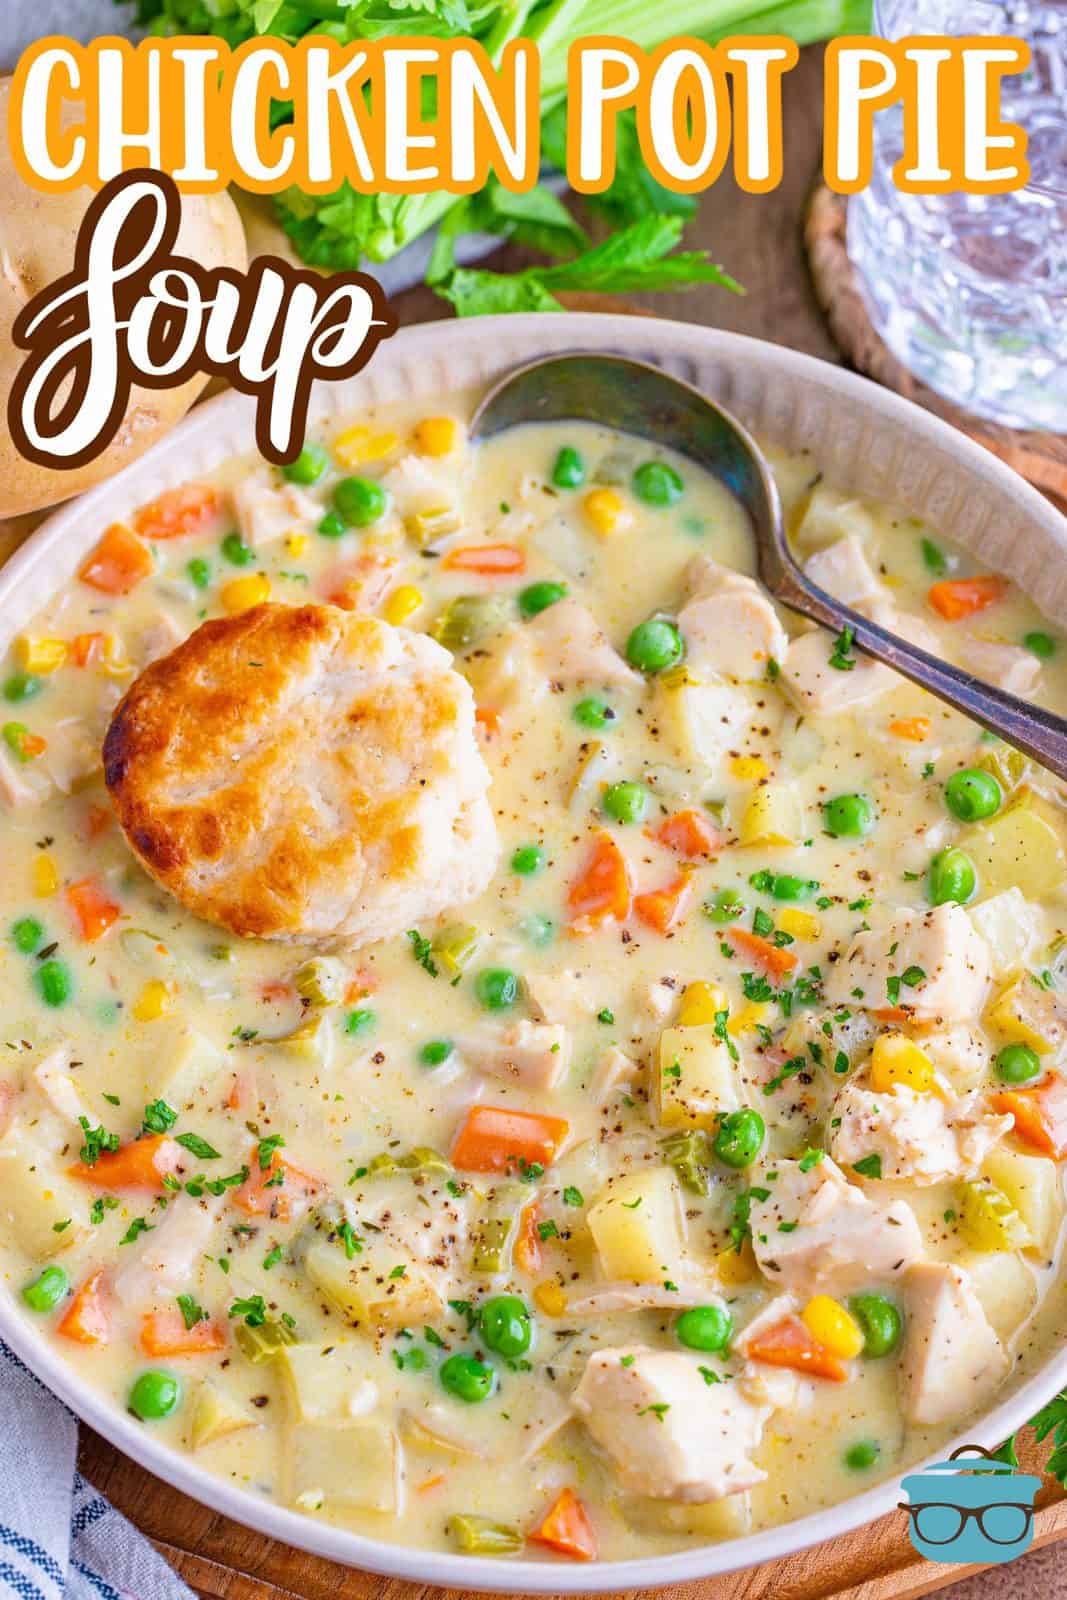 Pinterest image of Chicken Pot Pie Soup in bowl with biscuit and spoon.